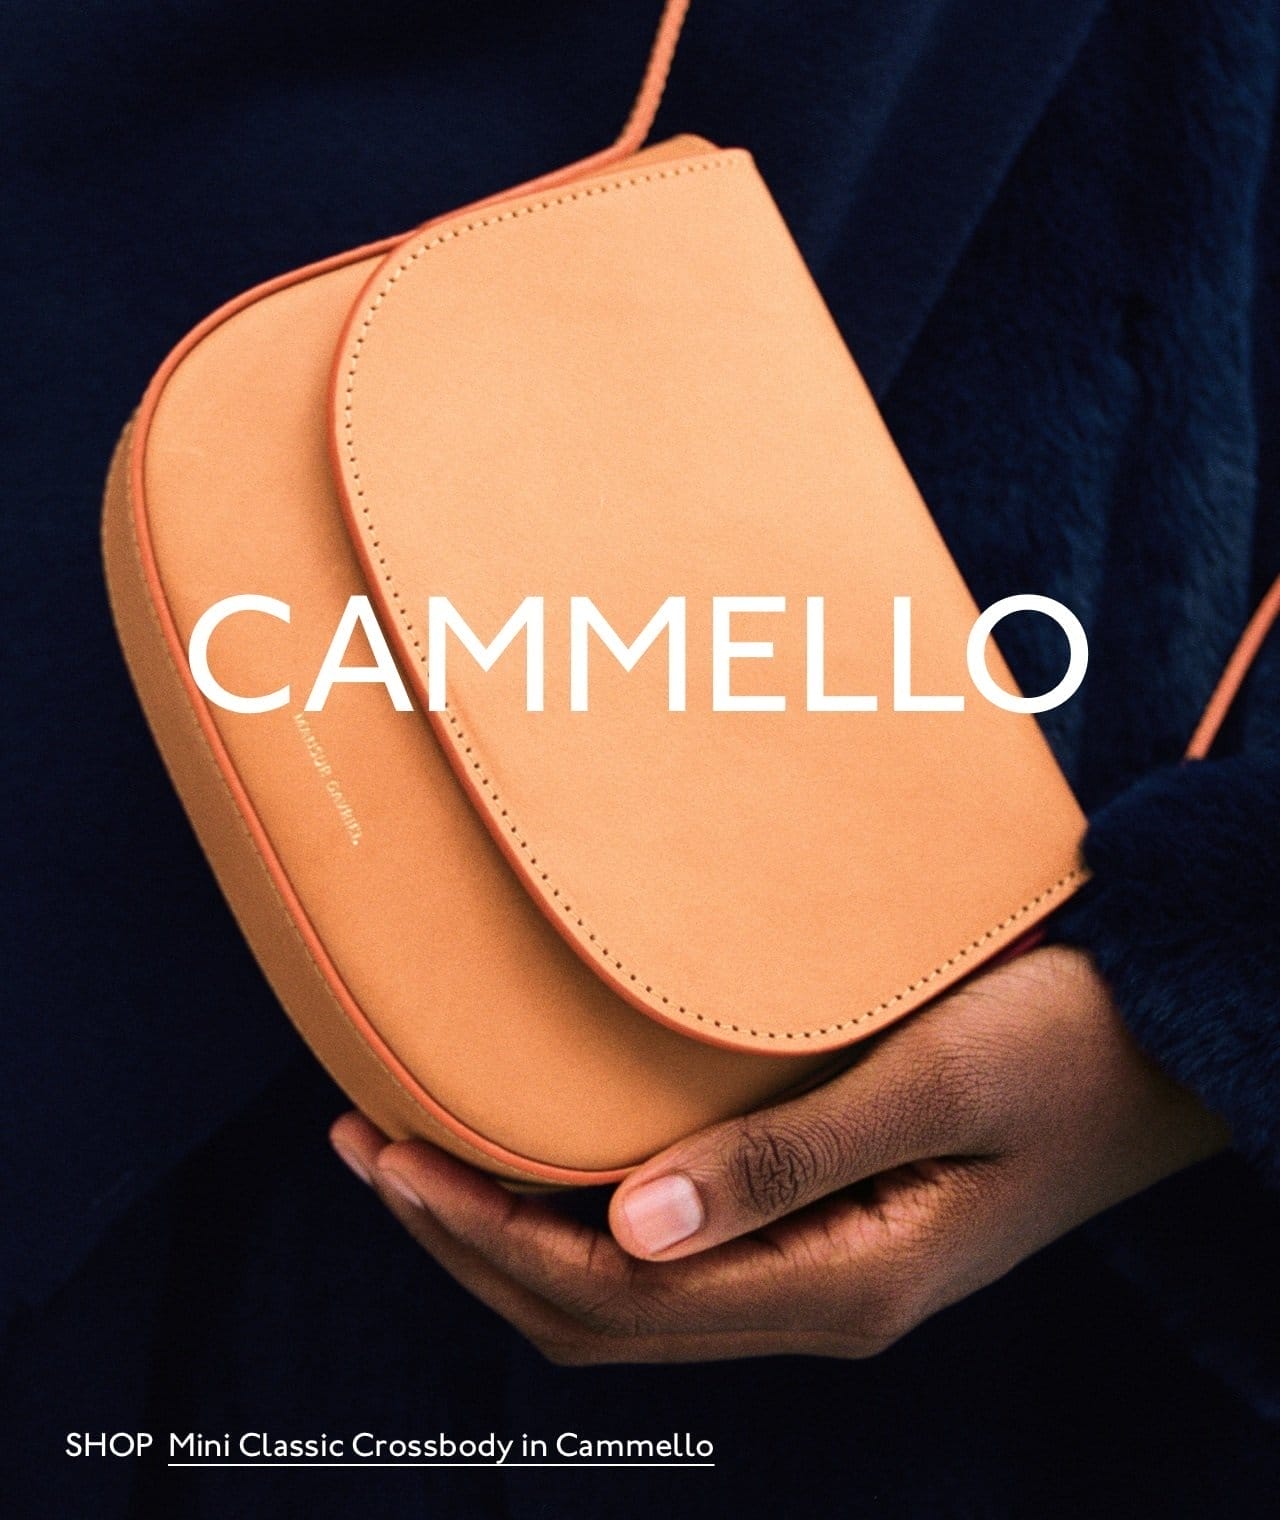 Discover our vegetable tanned leather collection. Shop the Mini Classic Crossbody in Cammello.